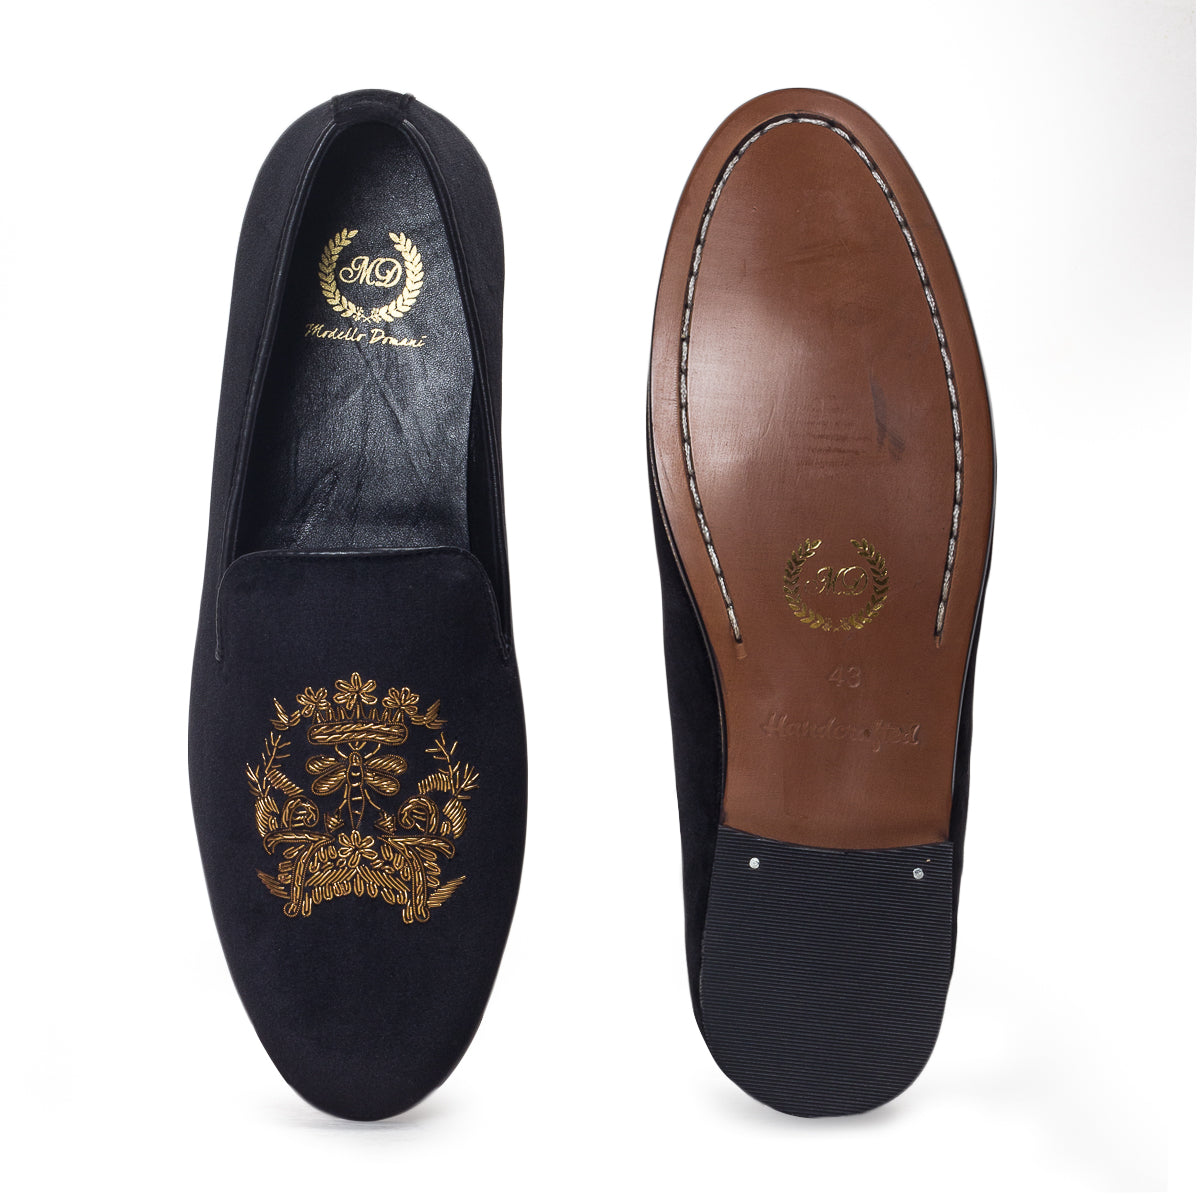 The Emperor Bee Slipons (Black - Limited Edition)